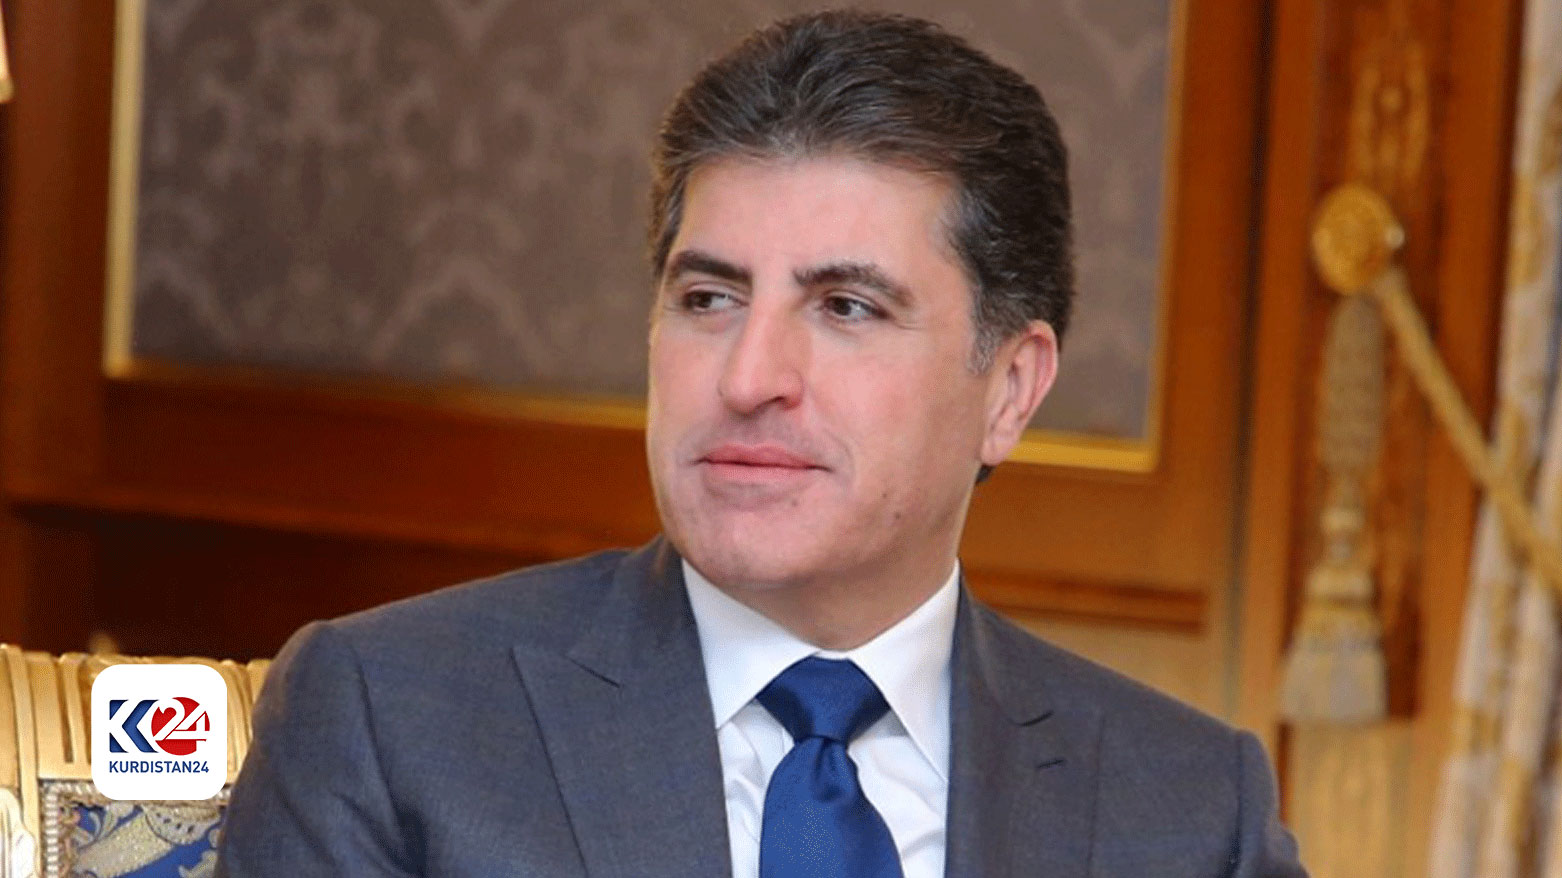 KRG President Nechirvan Barzani to hold talks with Iranian officials in Tehran